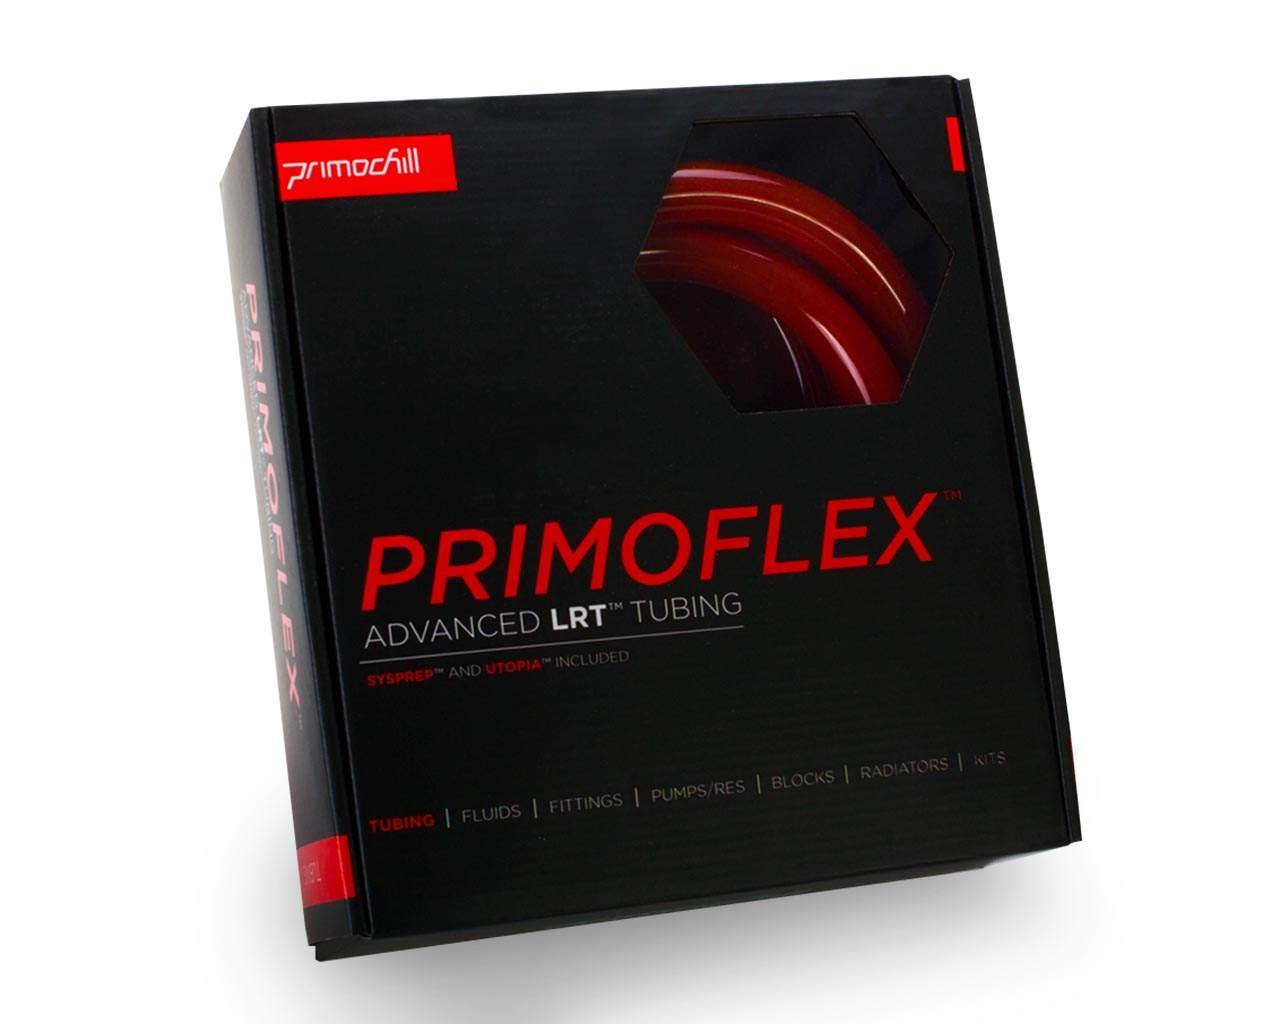 PrimoFlex Advanced LRT Soft Flexible Tubing - 7/16in.ID x 5/8in.OD, 10 feet - PrimoChill - KEEPING IT COOL Bloodshed Red